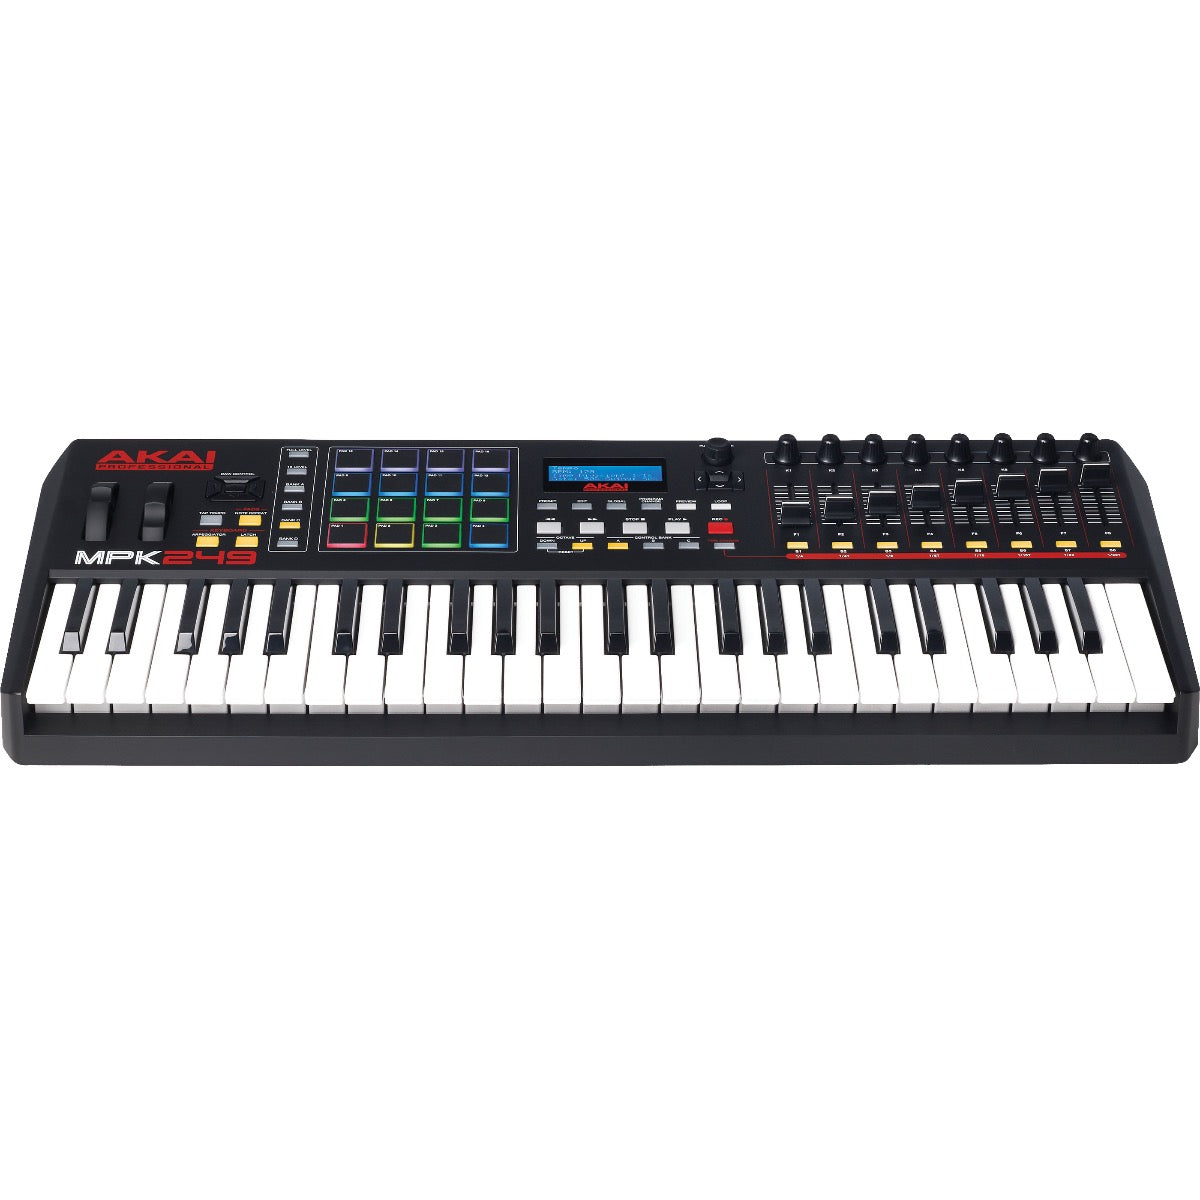 Perspective view of Akai Professional MPK249 Keyboard Controller showing top and front